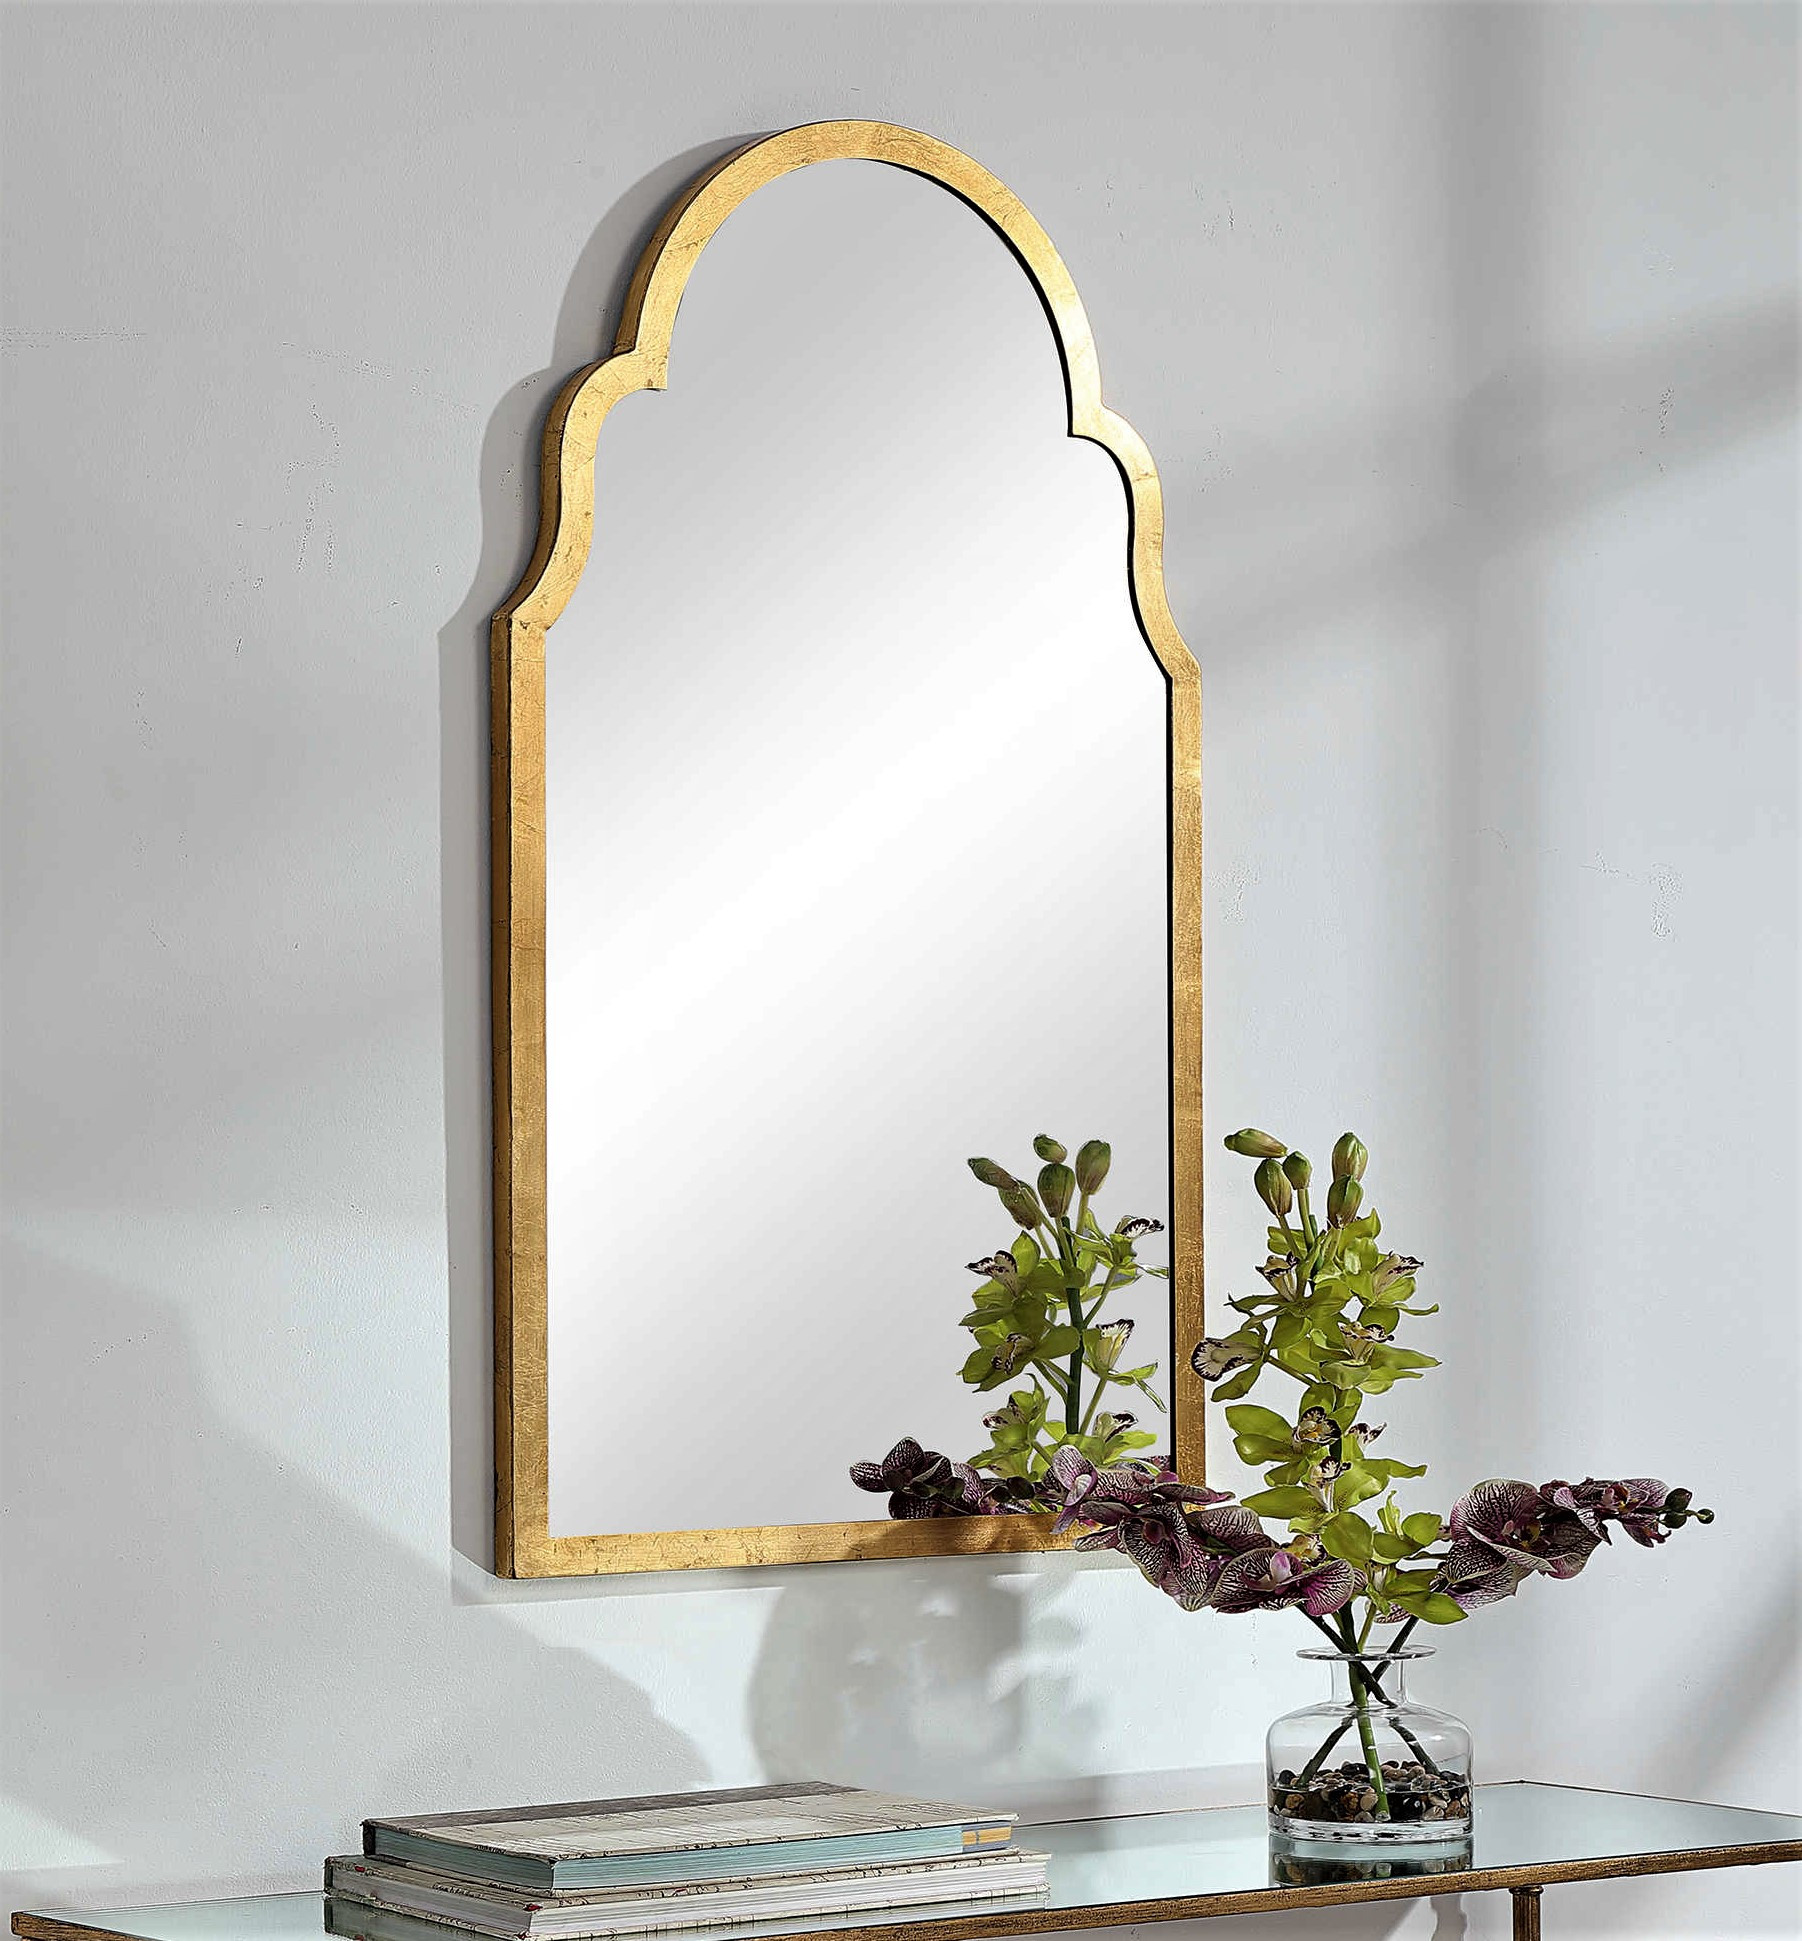 arched-top-mirror-gold-leaf2